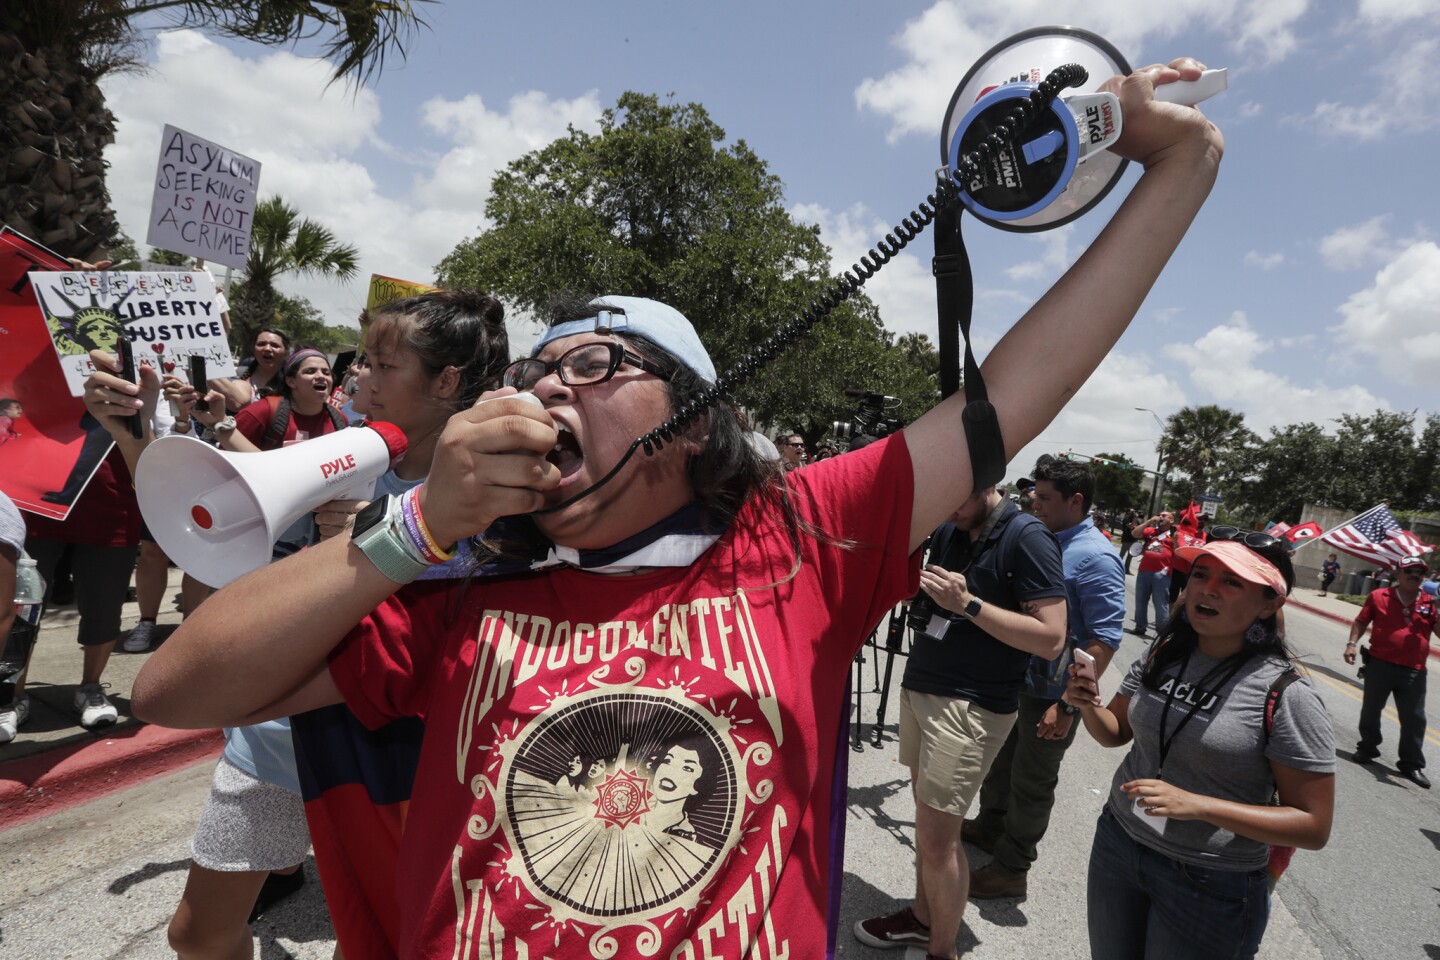 Yuanen Alvarado from Texas State University chants into a loudspeaker during a demonstration against U.S. immigration policies at Linear Park in Brownsville, Tx.